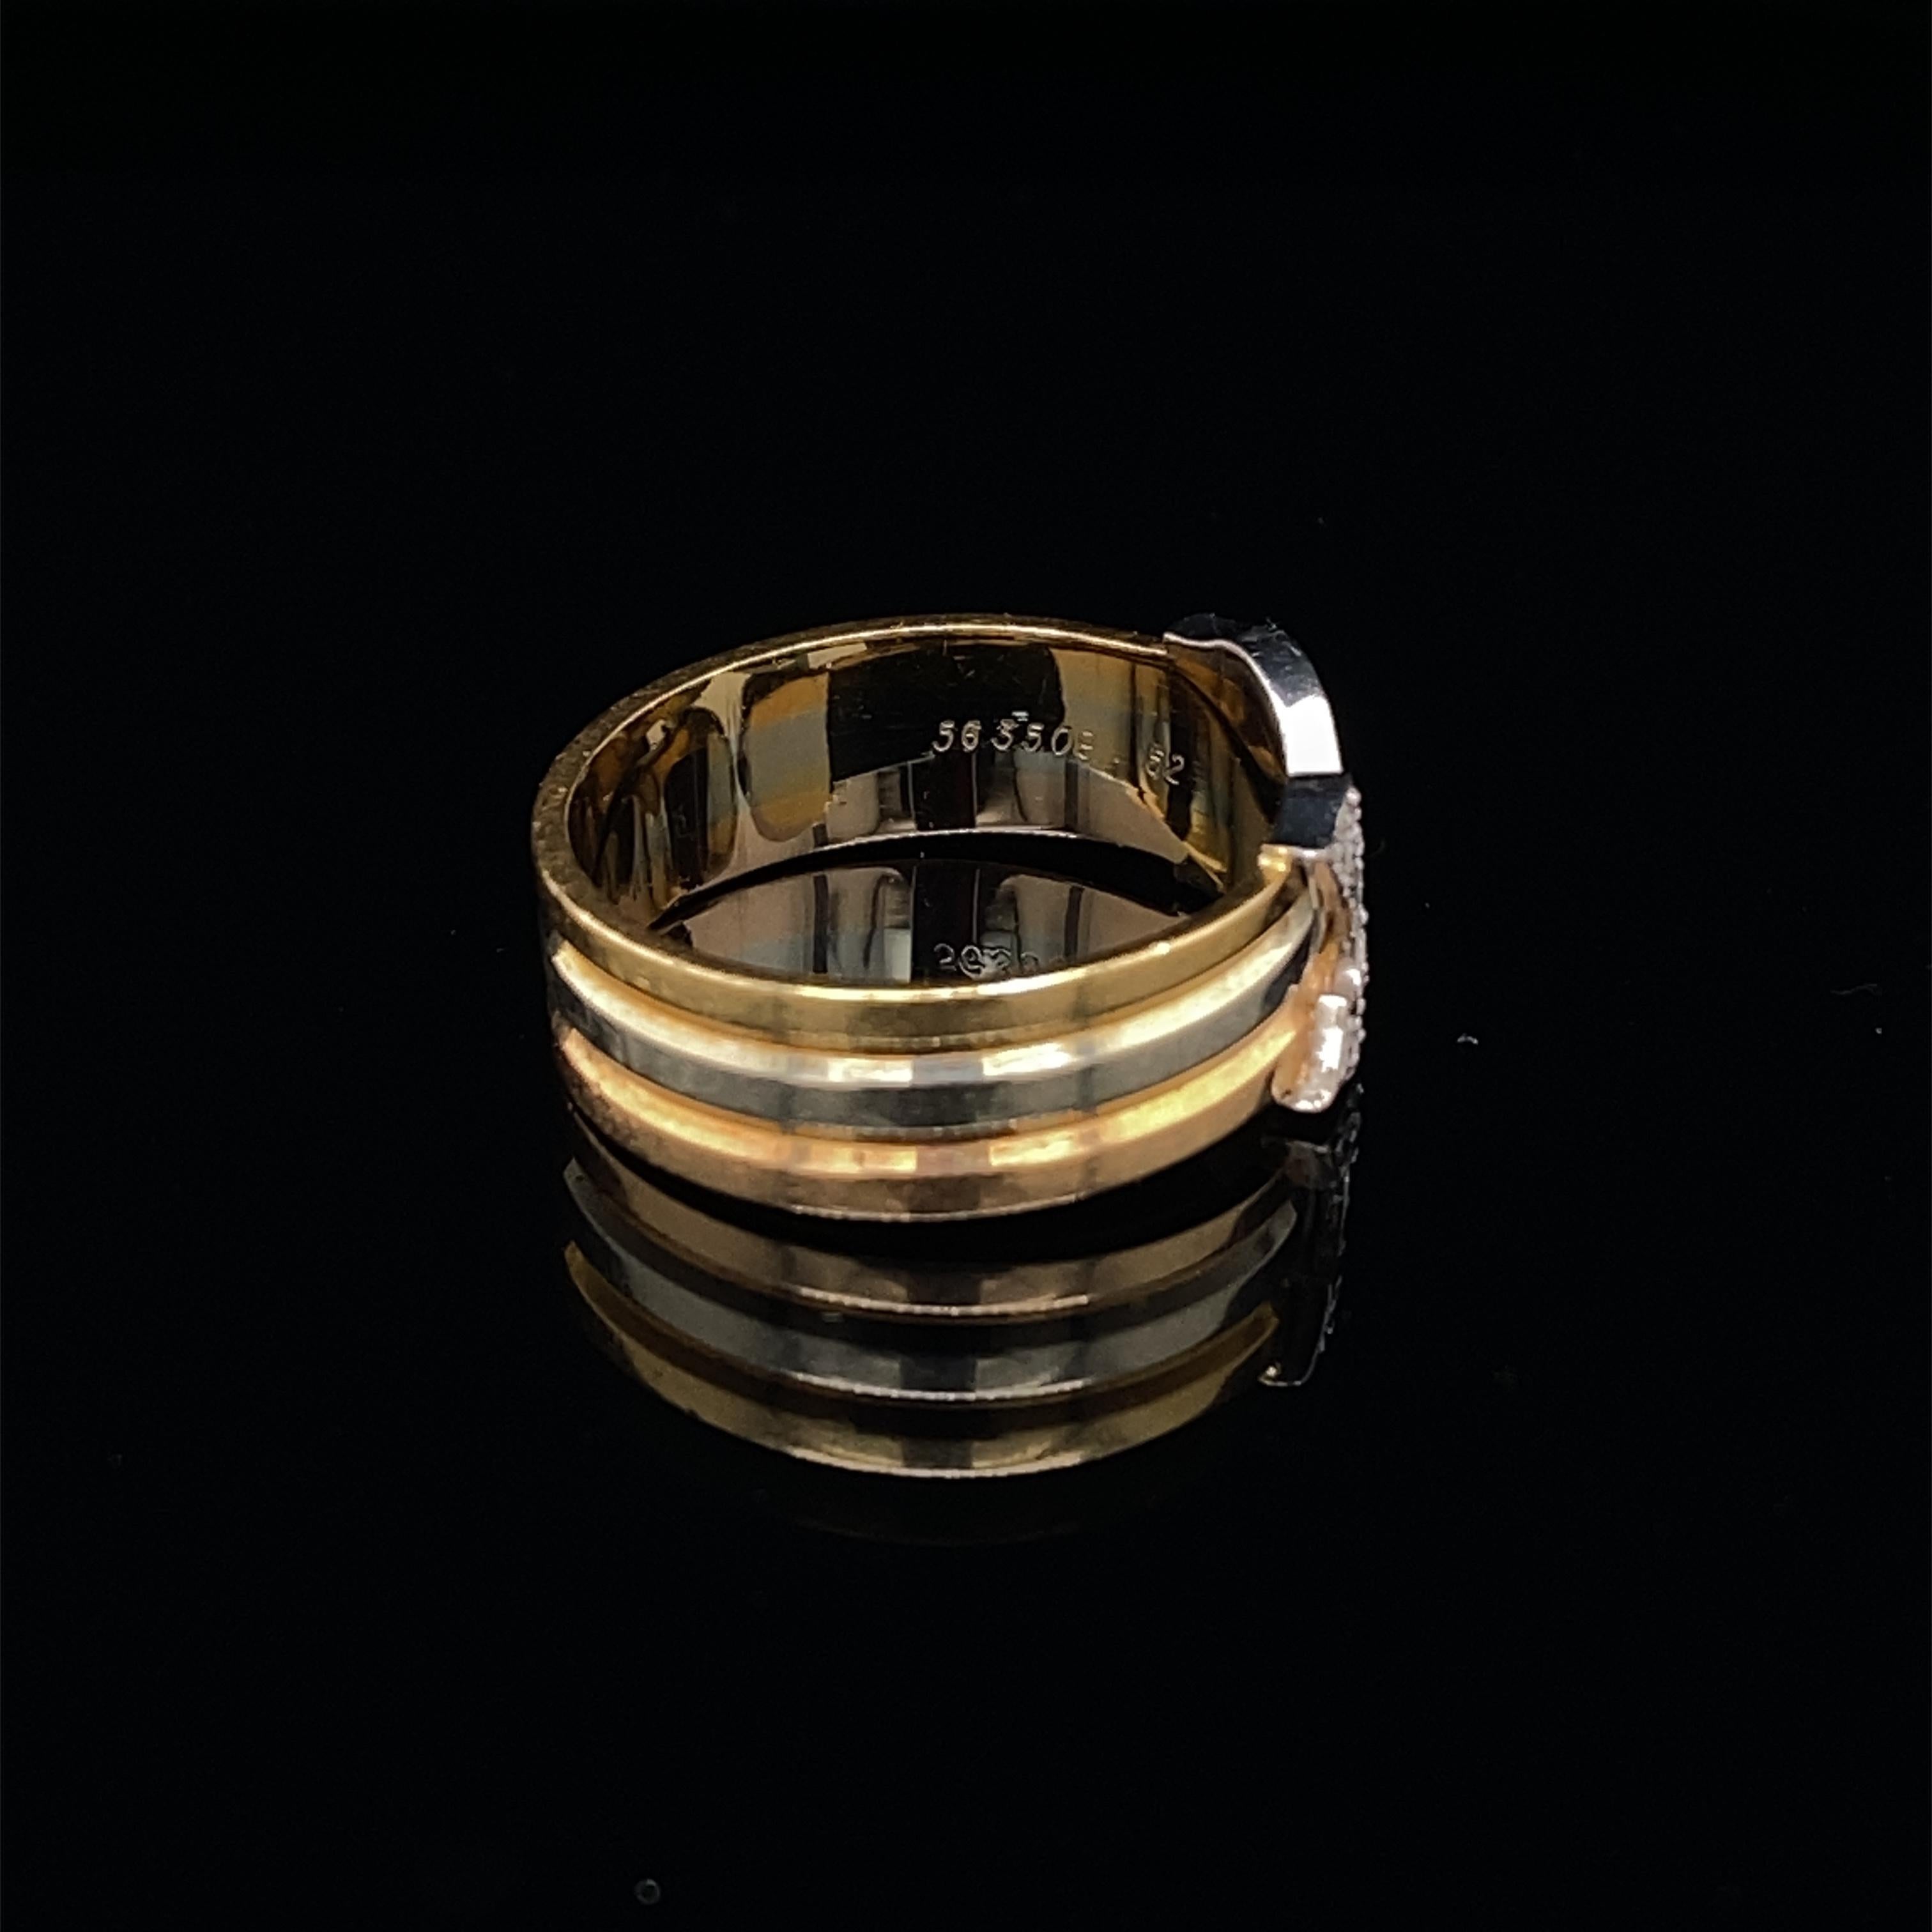 A fabulous diamond set double-C band ring by Cartier crafted in 18 karat yellow white and rose gold.

Such an incredibly wearable recognizable statement ring with the two C's pave set with round brilliant cut diamonds of 0.20 carats